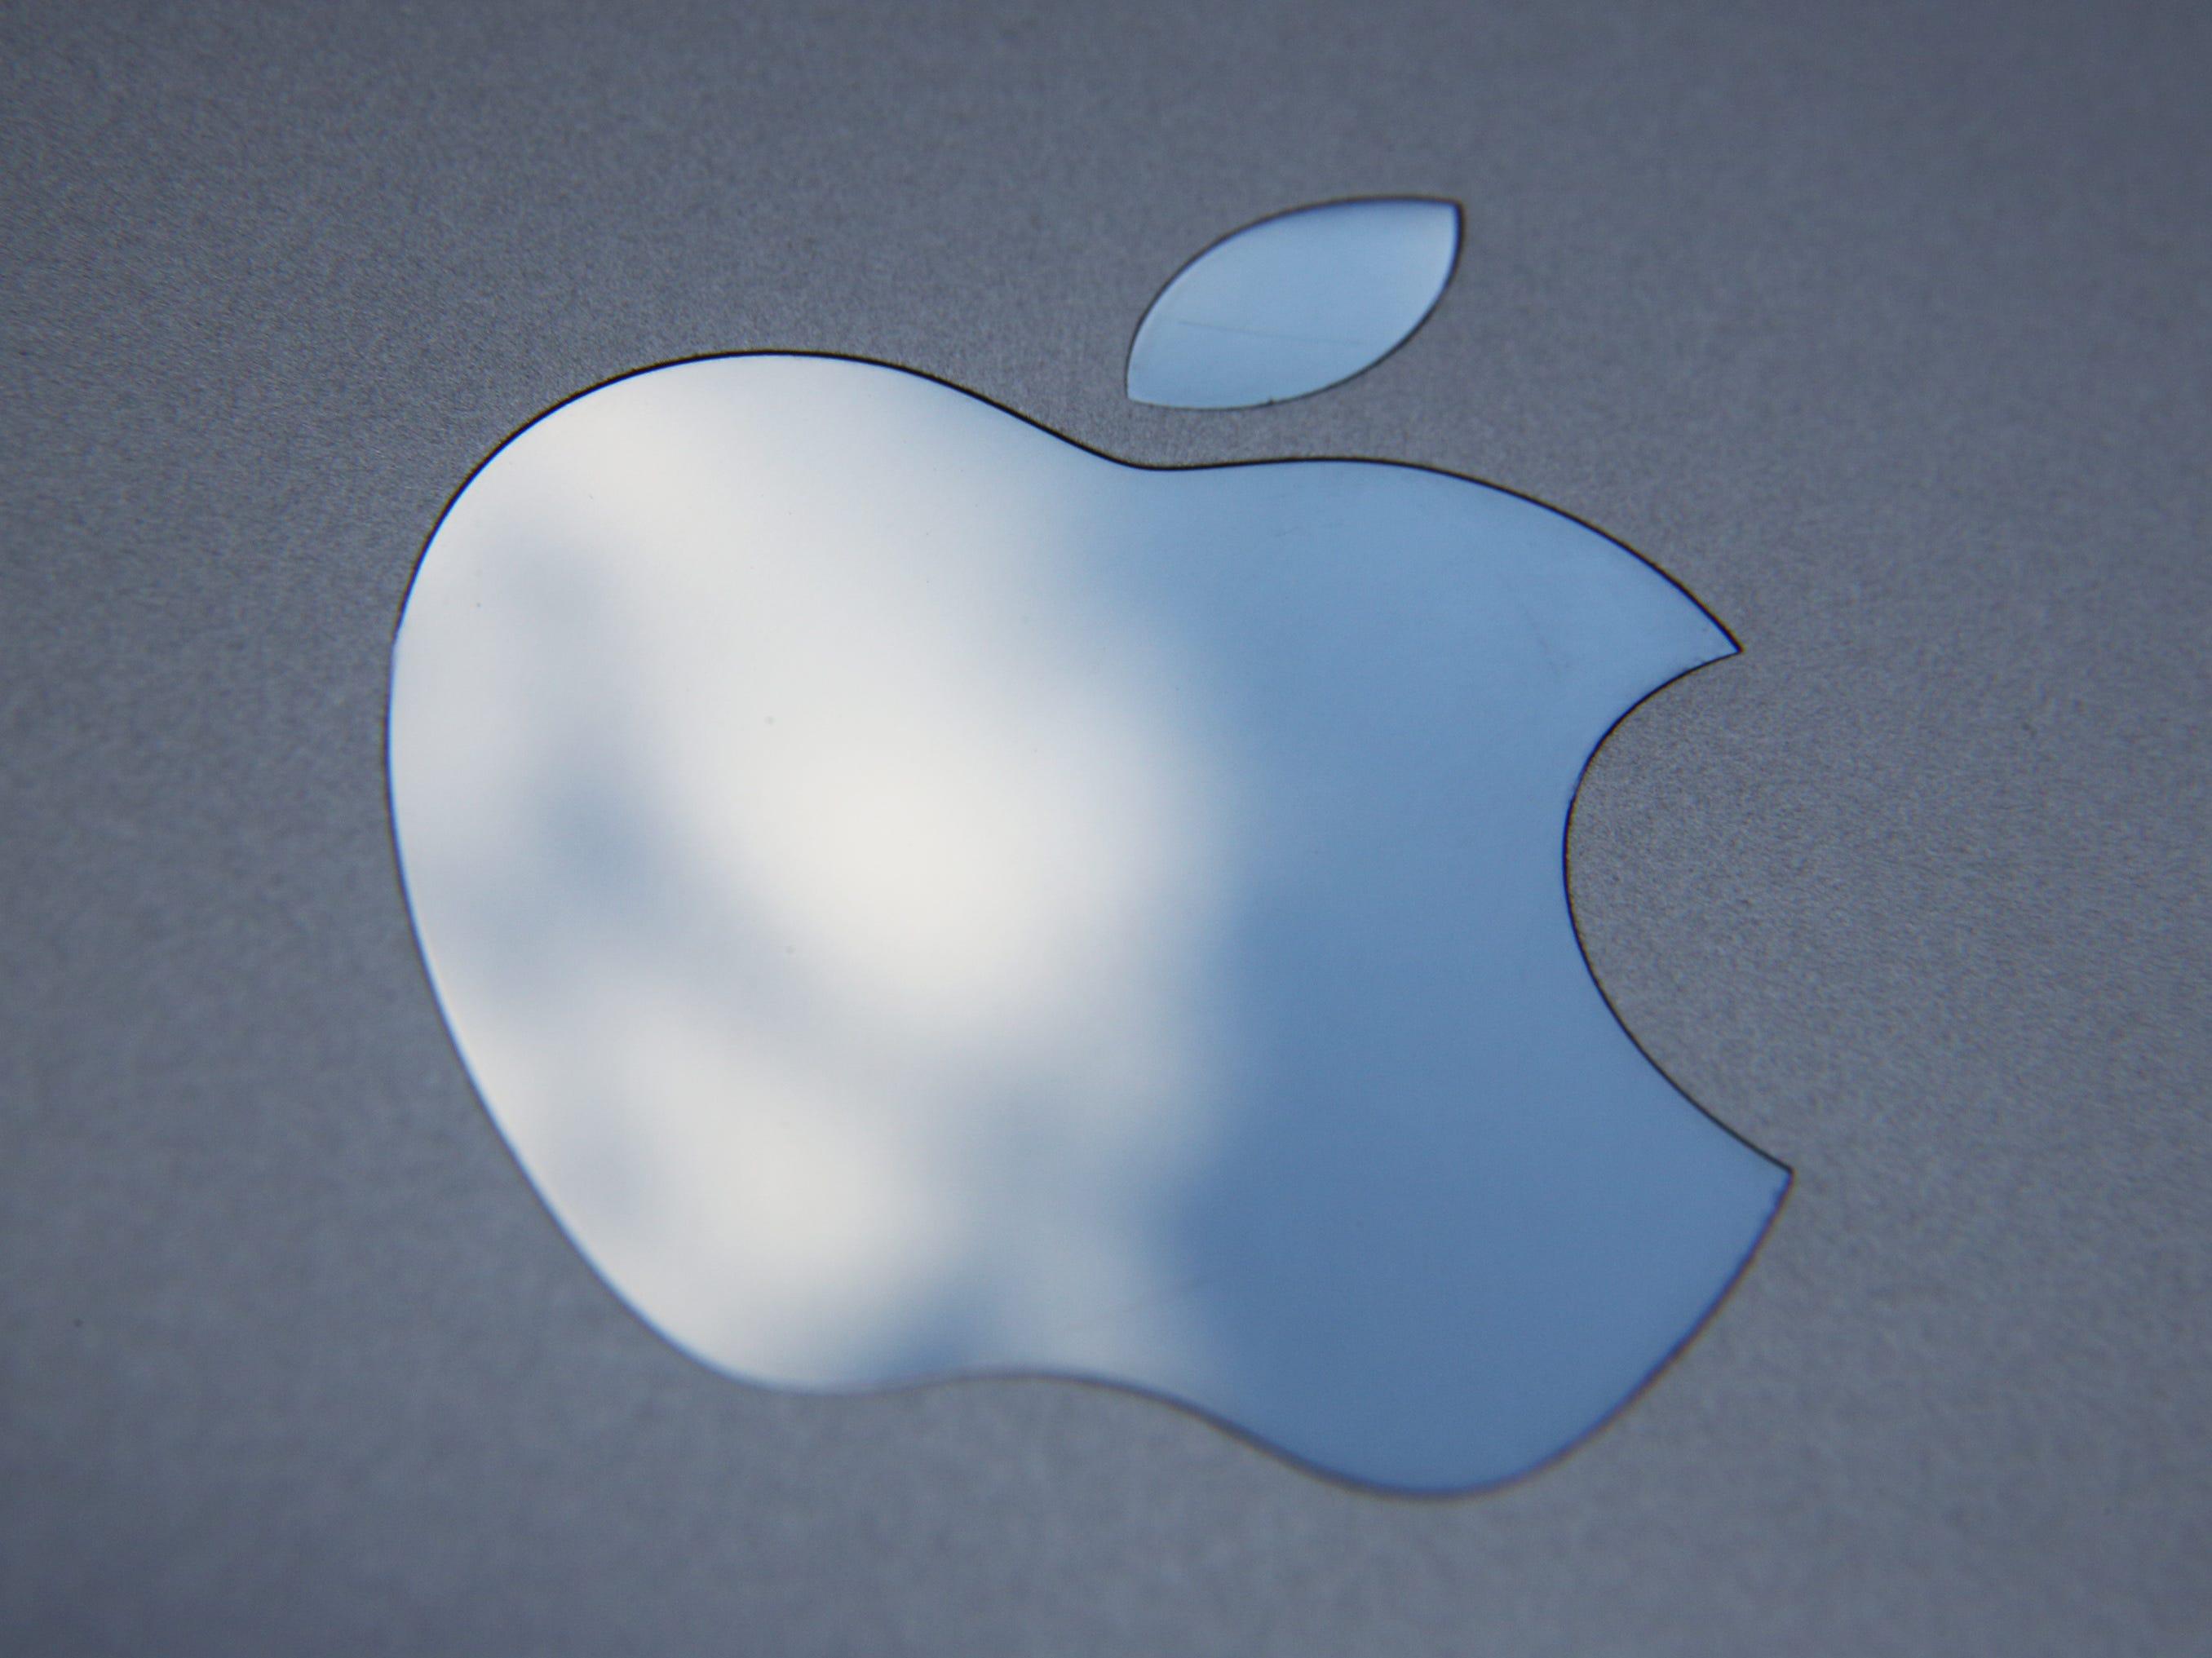 Apple Nude Photos Leak Not Linked To Systems Breach